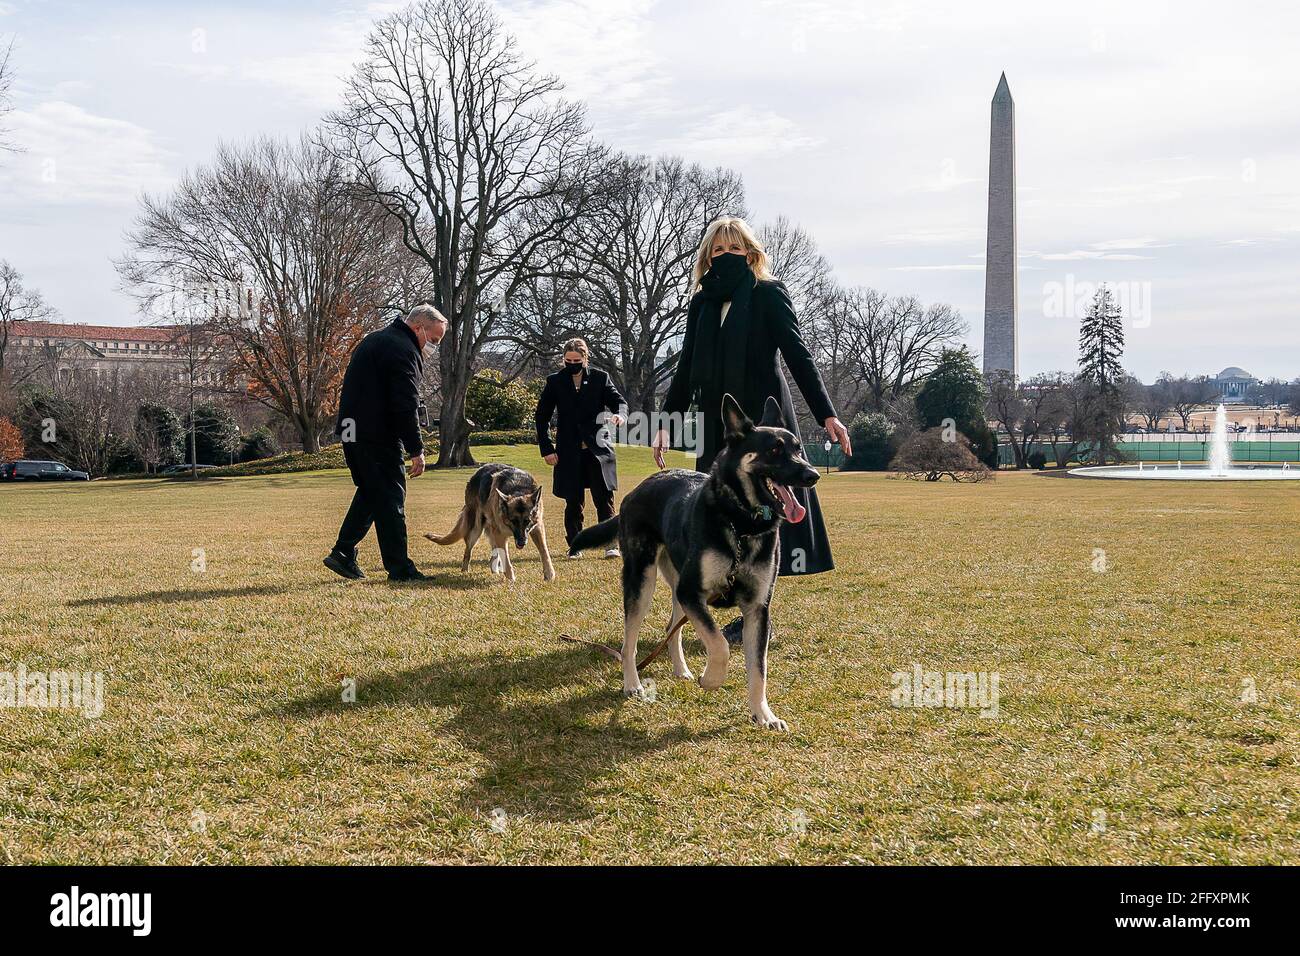 P20210124CW-0220: First Lady Dr. Jill Biden, joined by White House Grounds Superintendent Dale Haney and her granddaughter Maisy Biden, play with the Biden’s dogs Major and Champ on the South Lawn of the White House. Major and Champ are the first pets at the White House since the Obama Administration. (Official White House Photo by Chandler West) Stock Photo